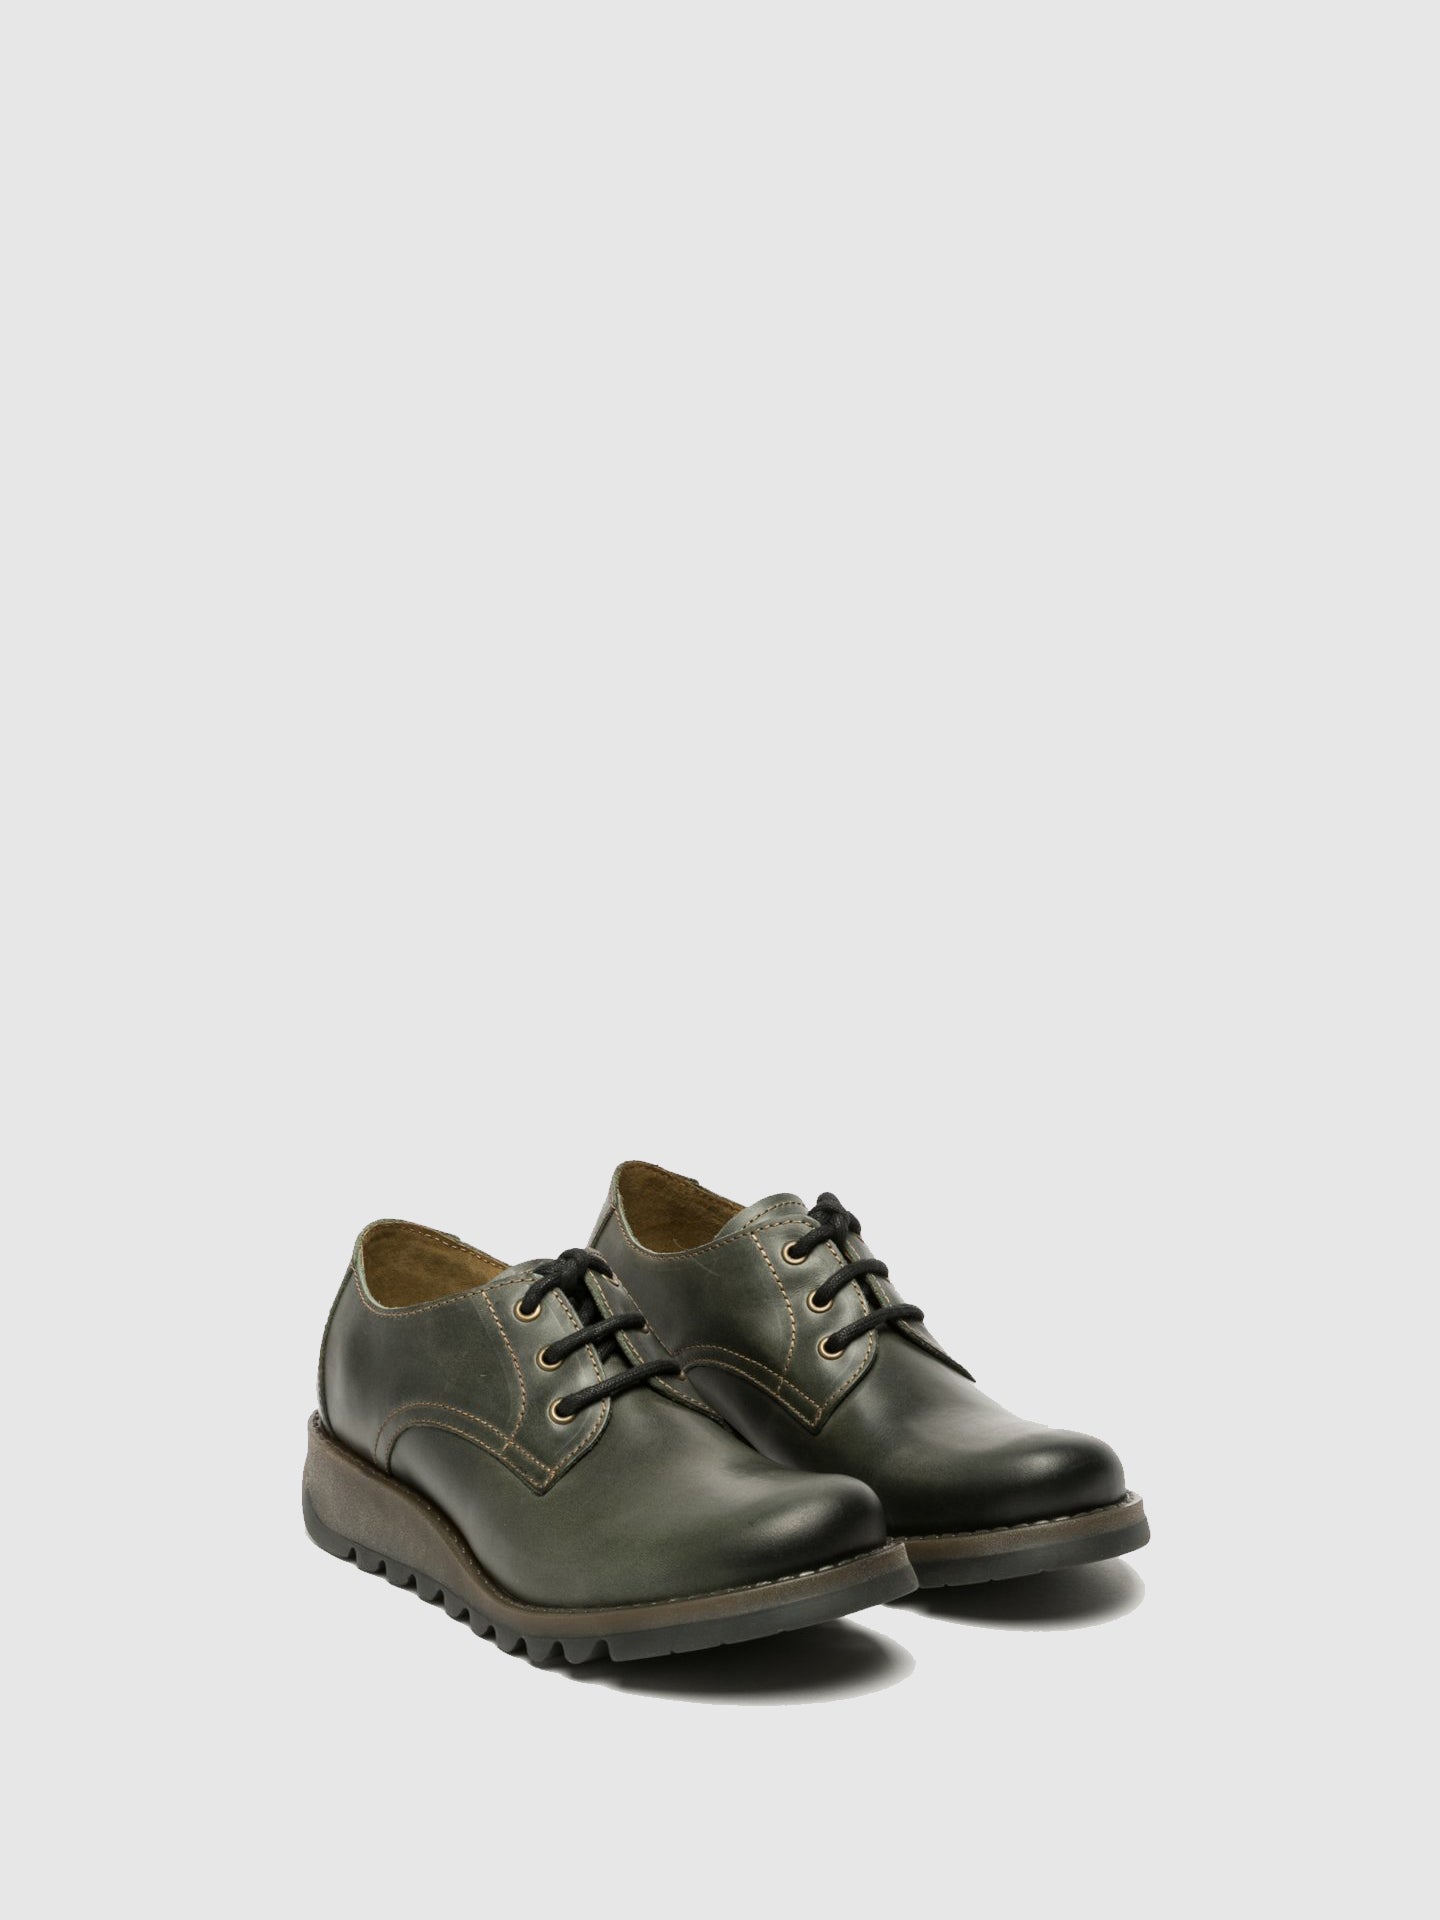 Fly London Green Derby Shoes